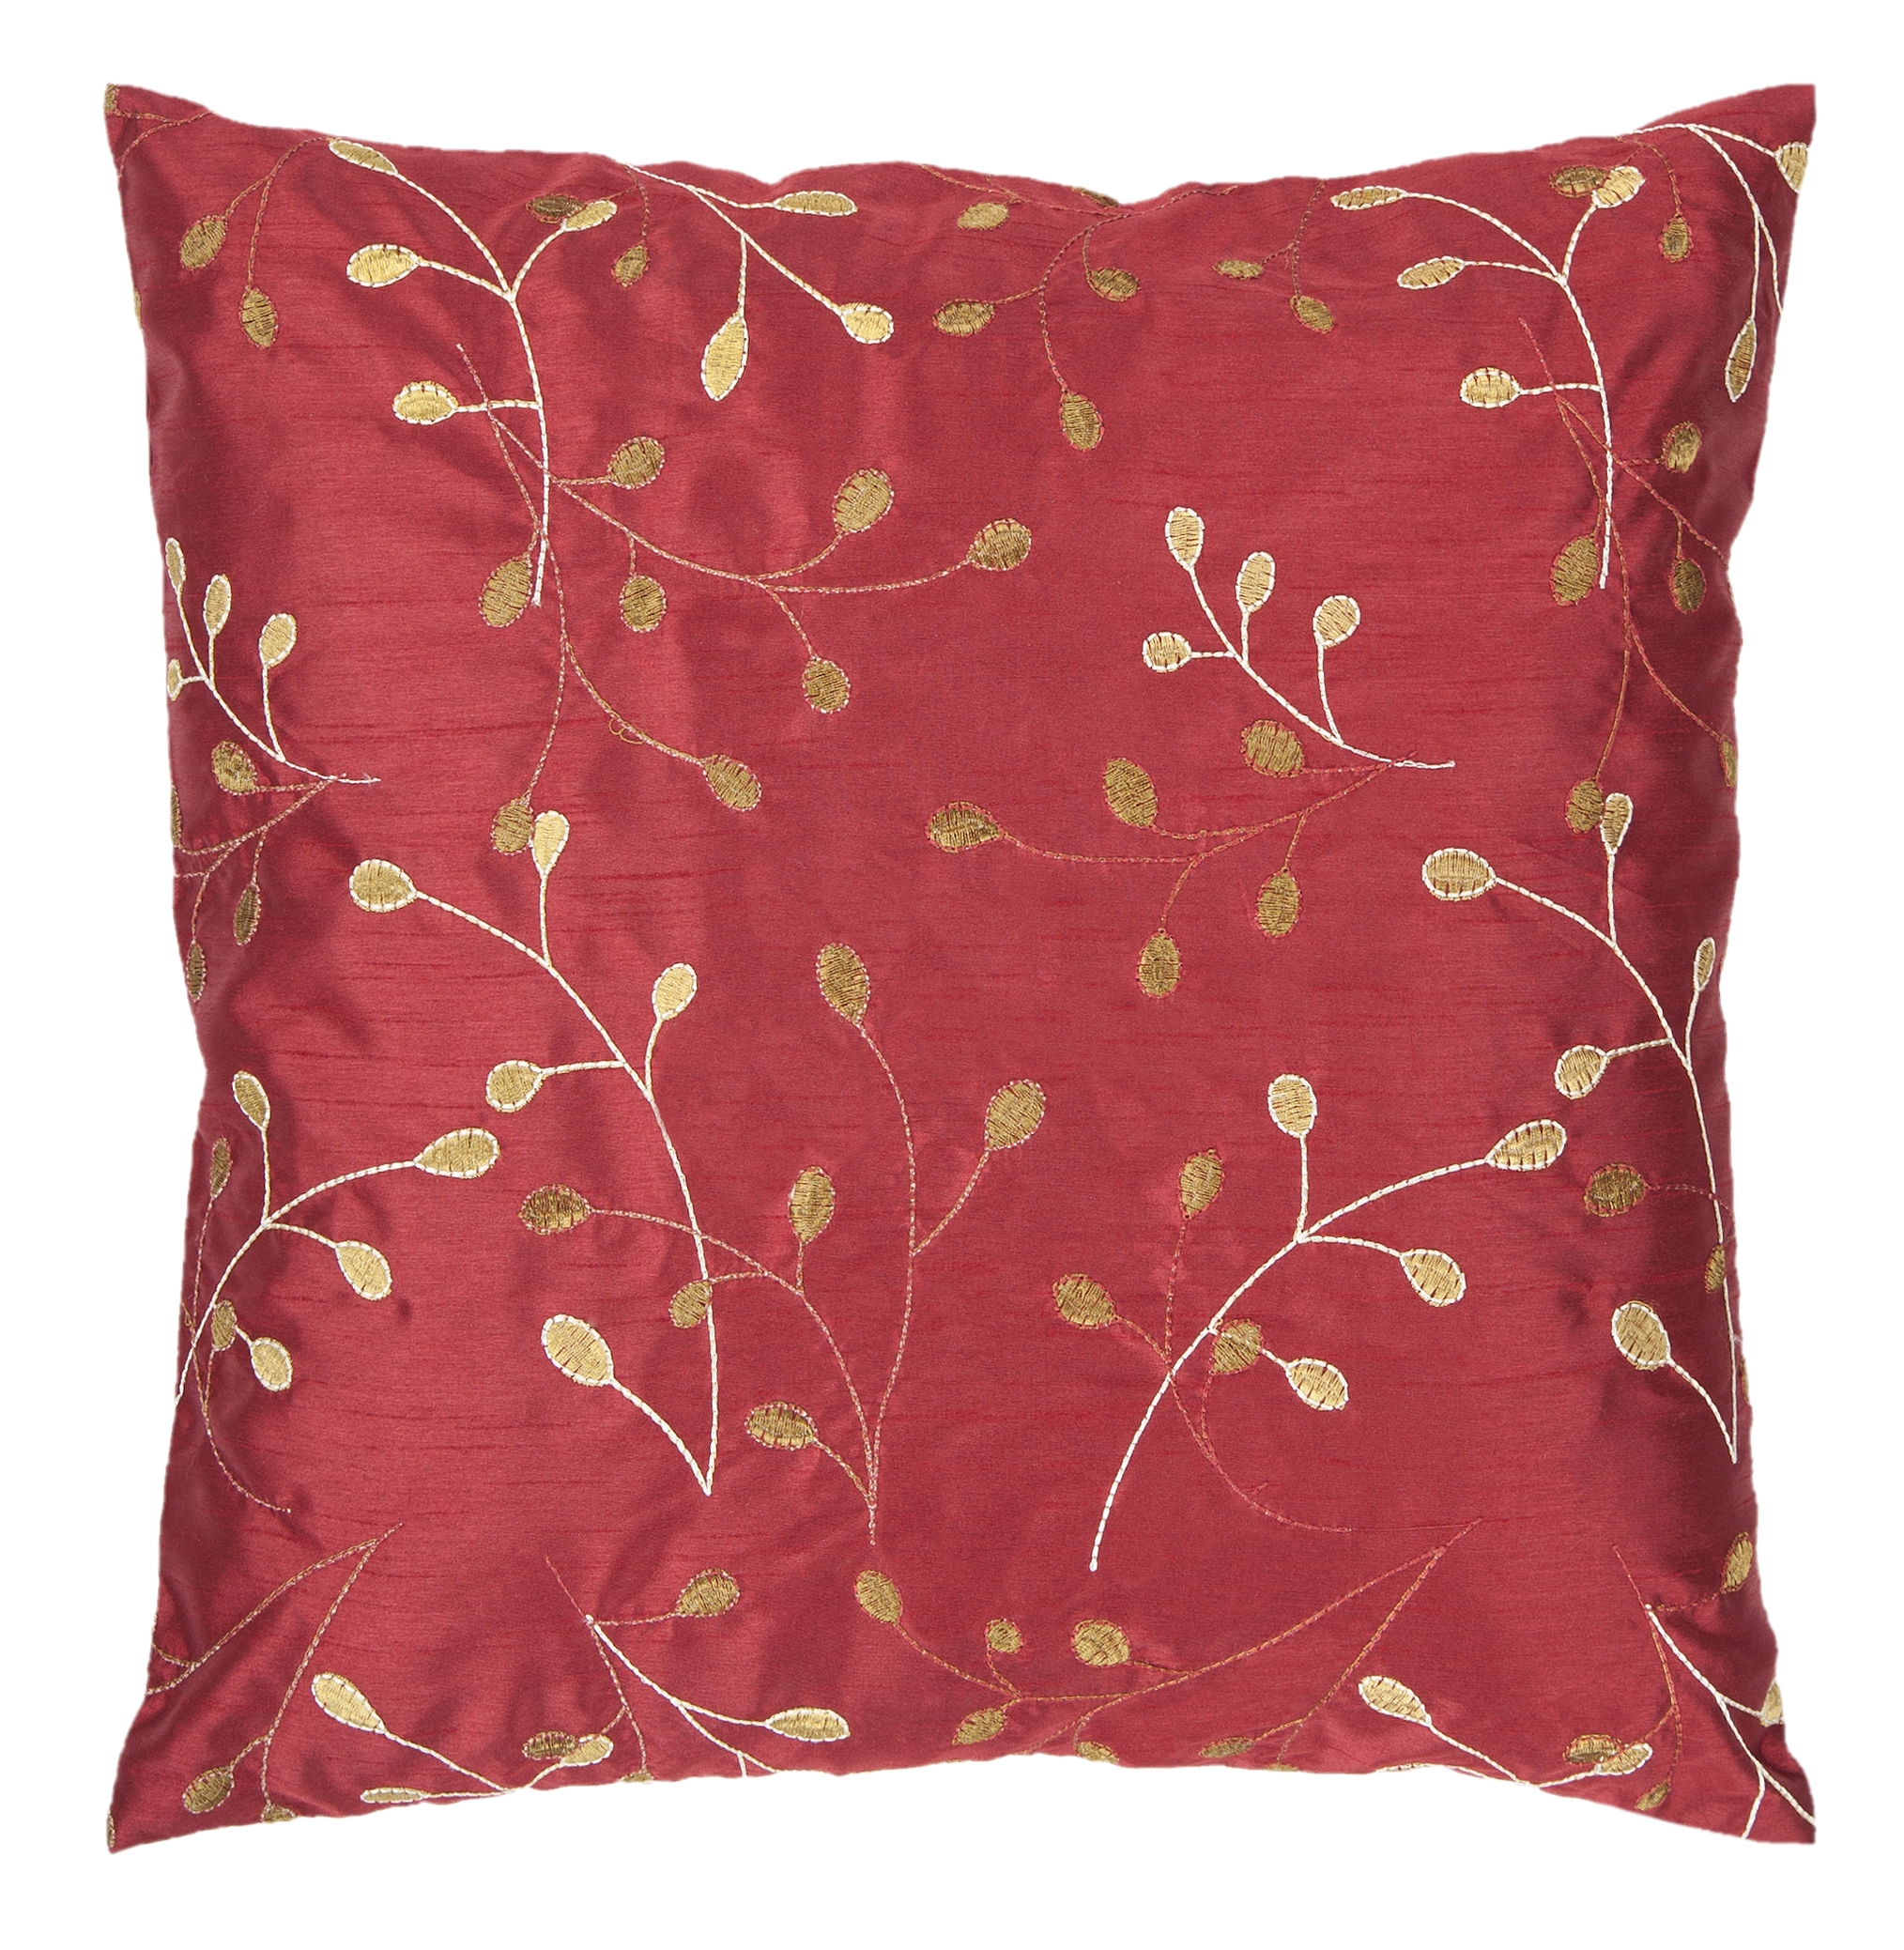 Blossom II Throw Pillow, 18" x 18", with down insert - Image 0